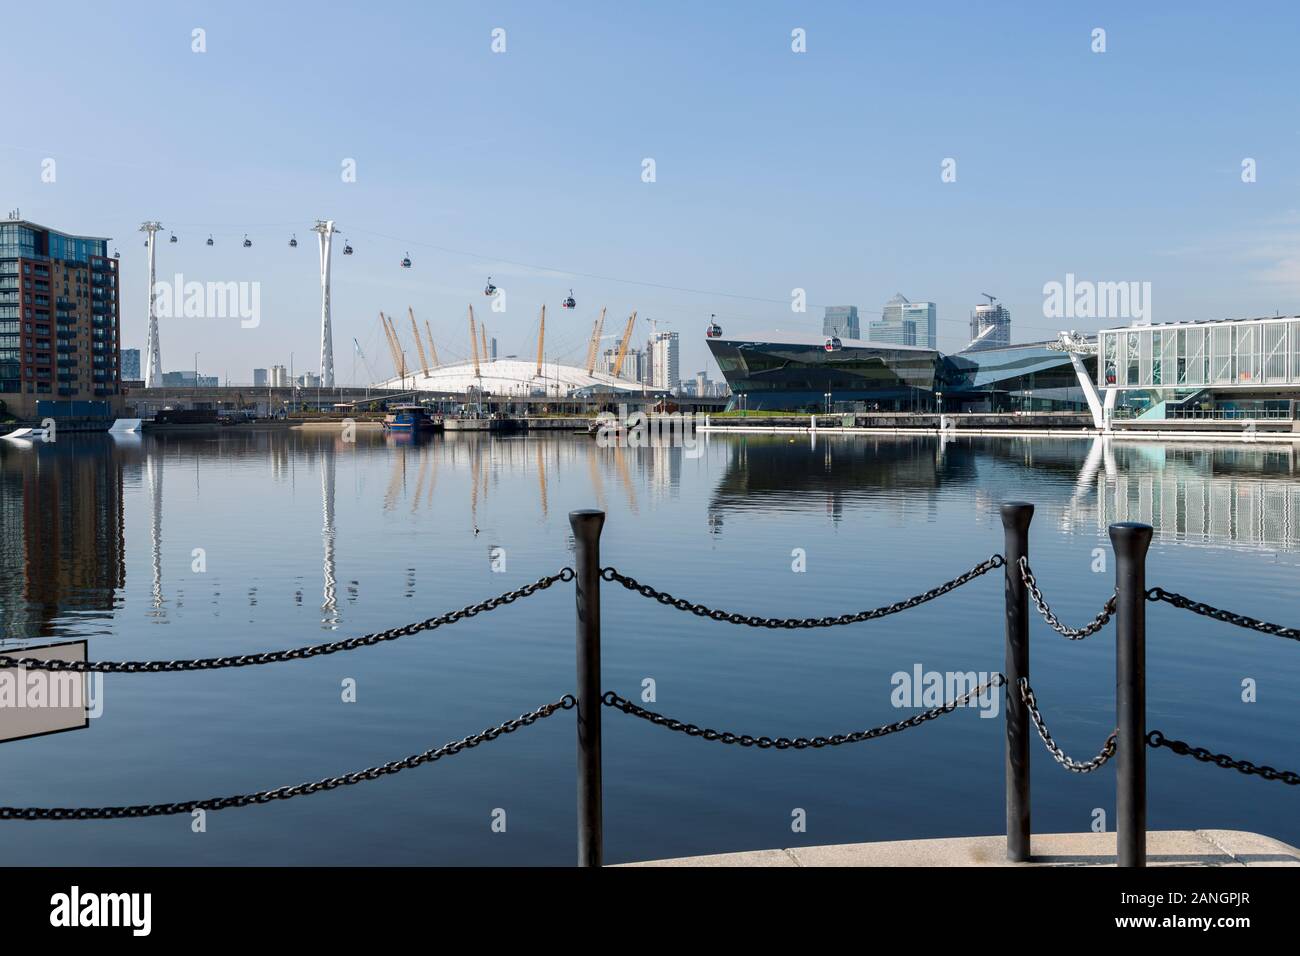 London docklands, Millennium Dome and Emirates Cable car, England Stock Photo